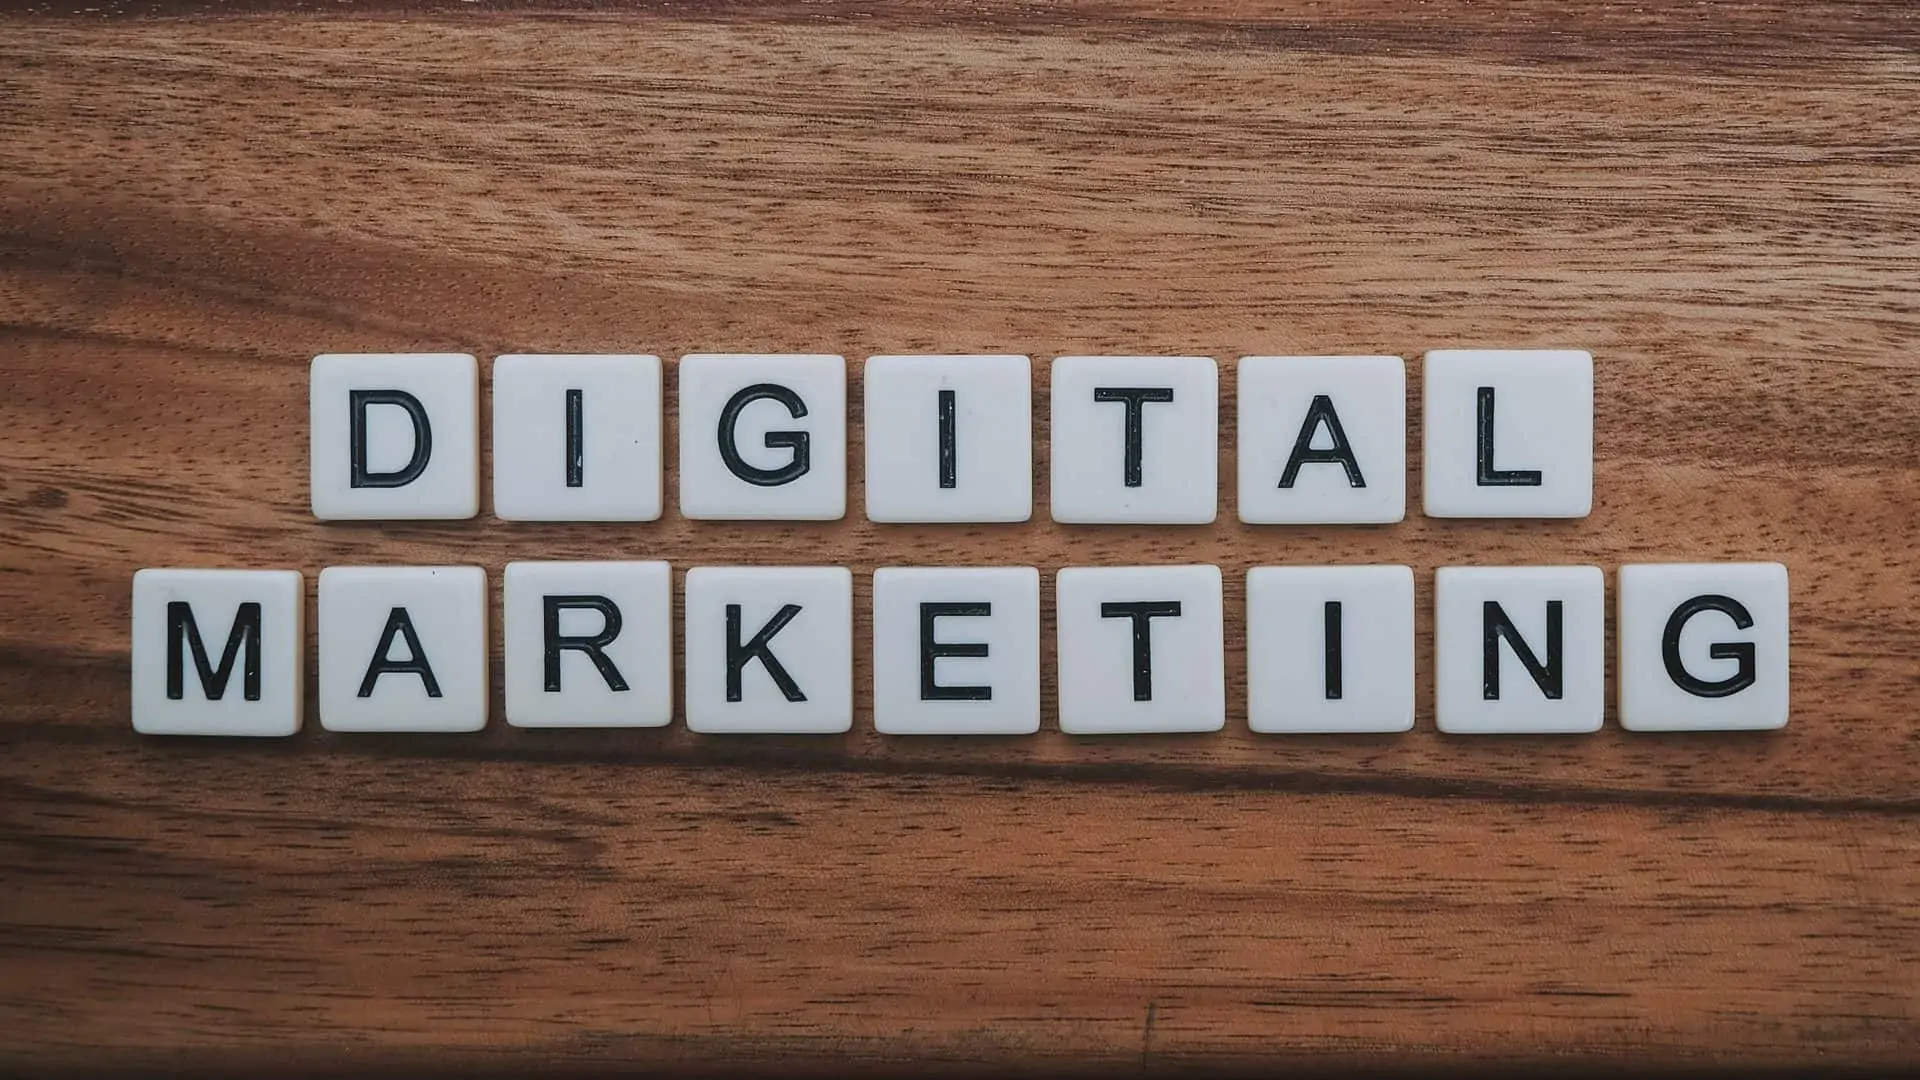 Digital Marketing:  how to delight on a budget